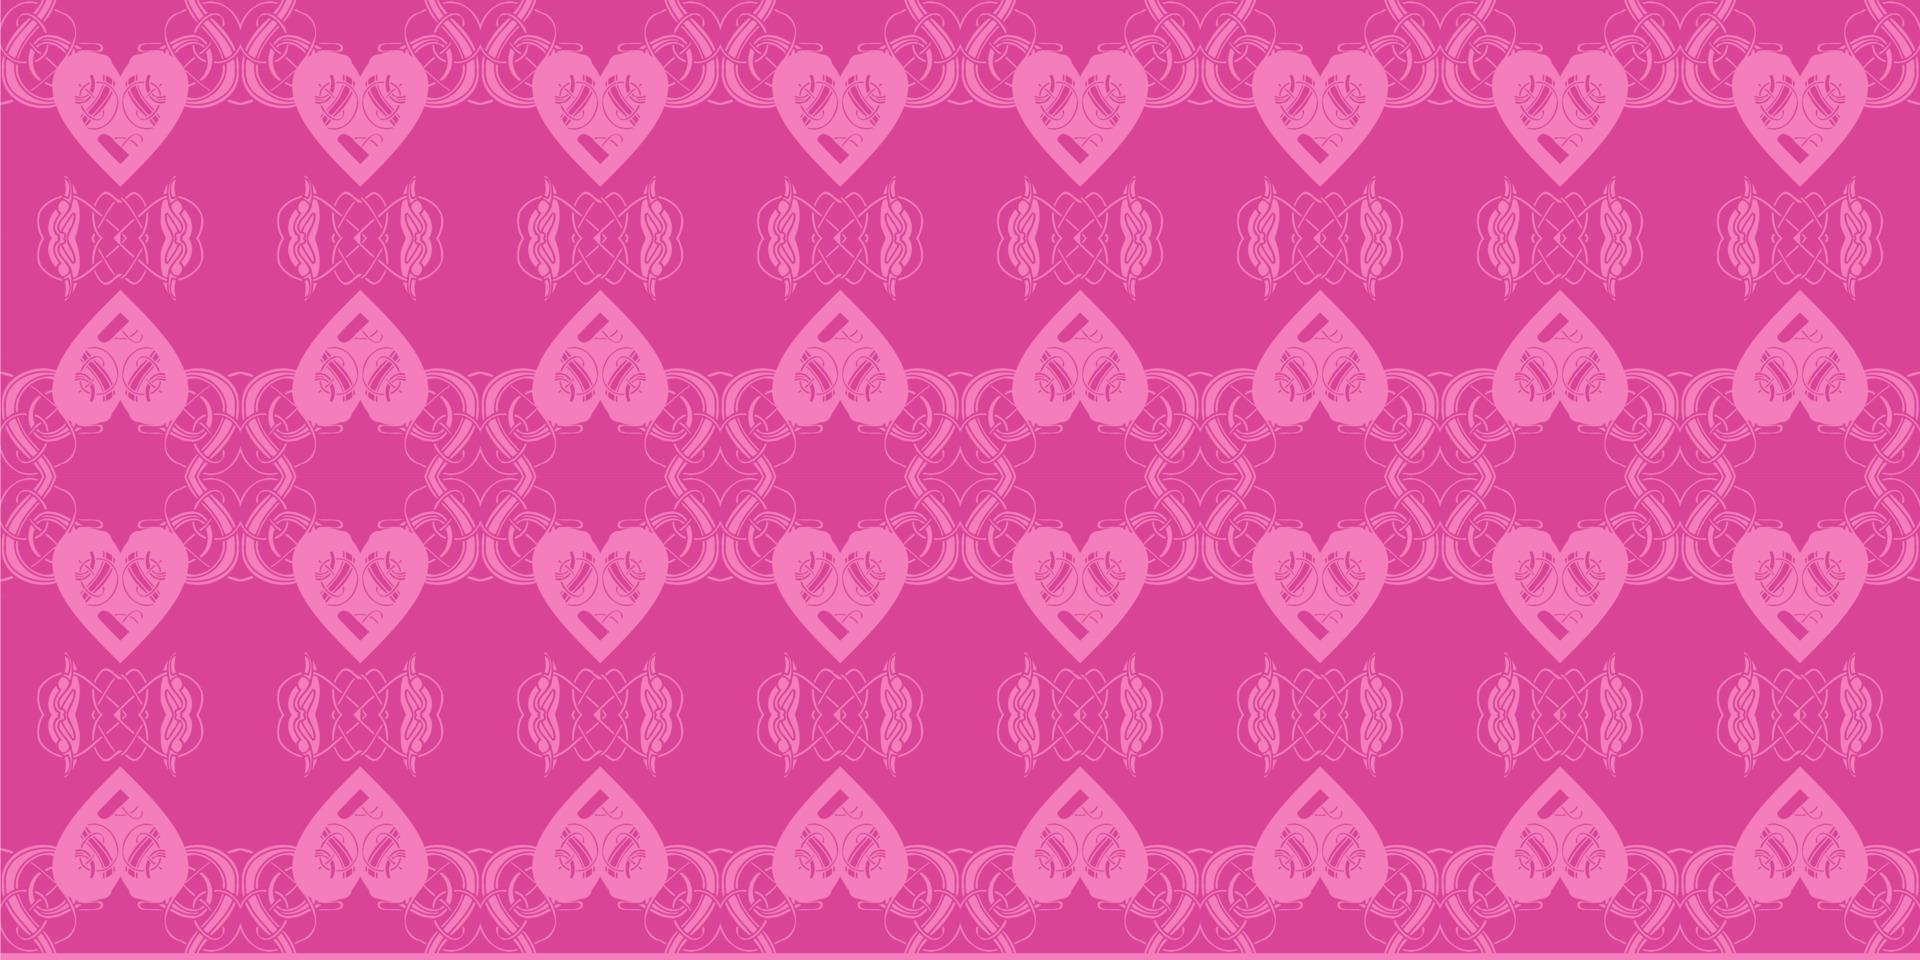 abstract pink background, heart pattern ornament seamless vector